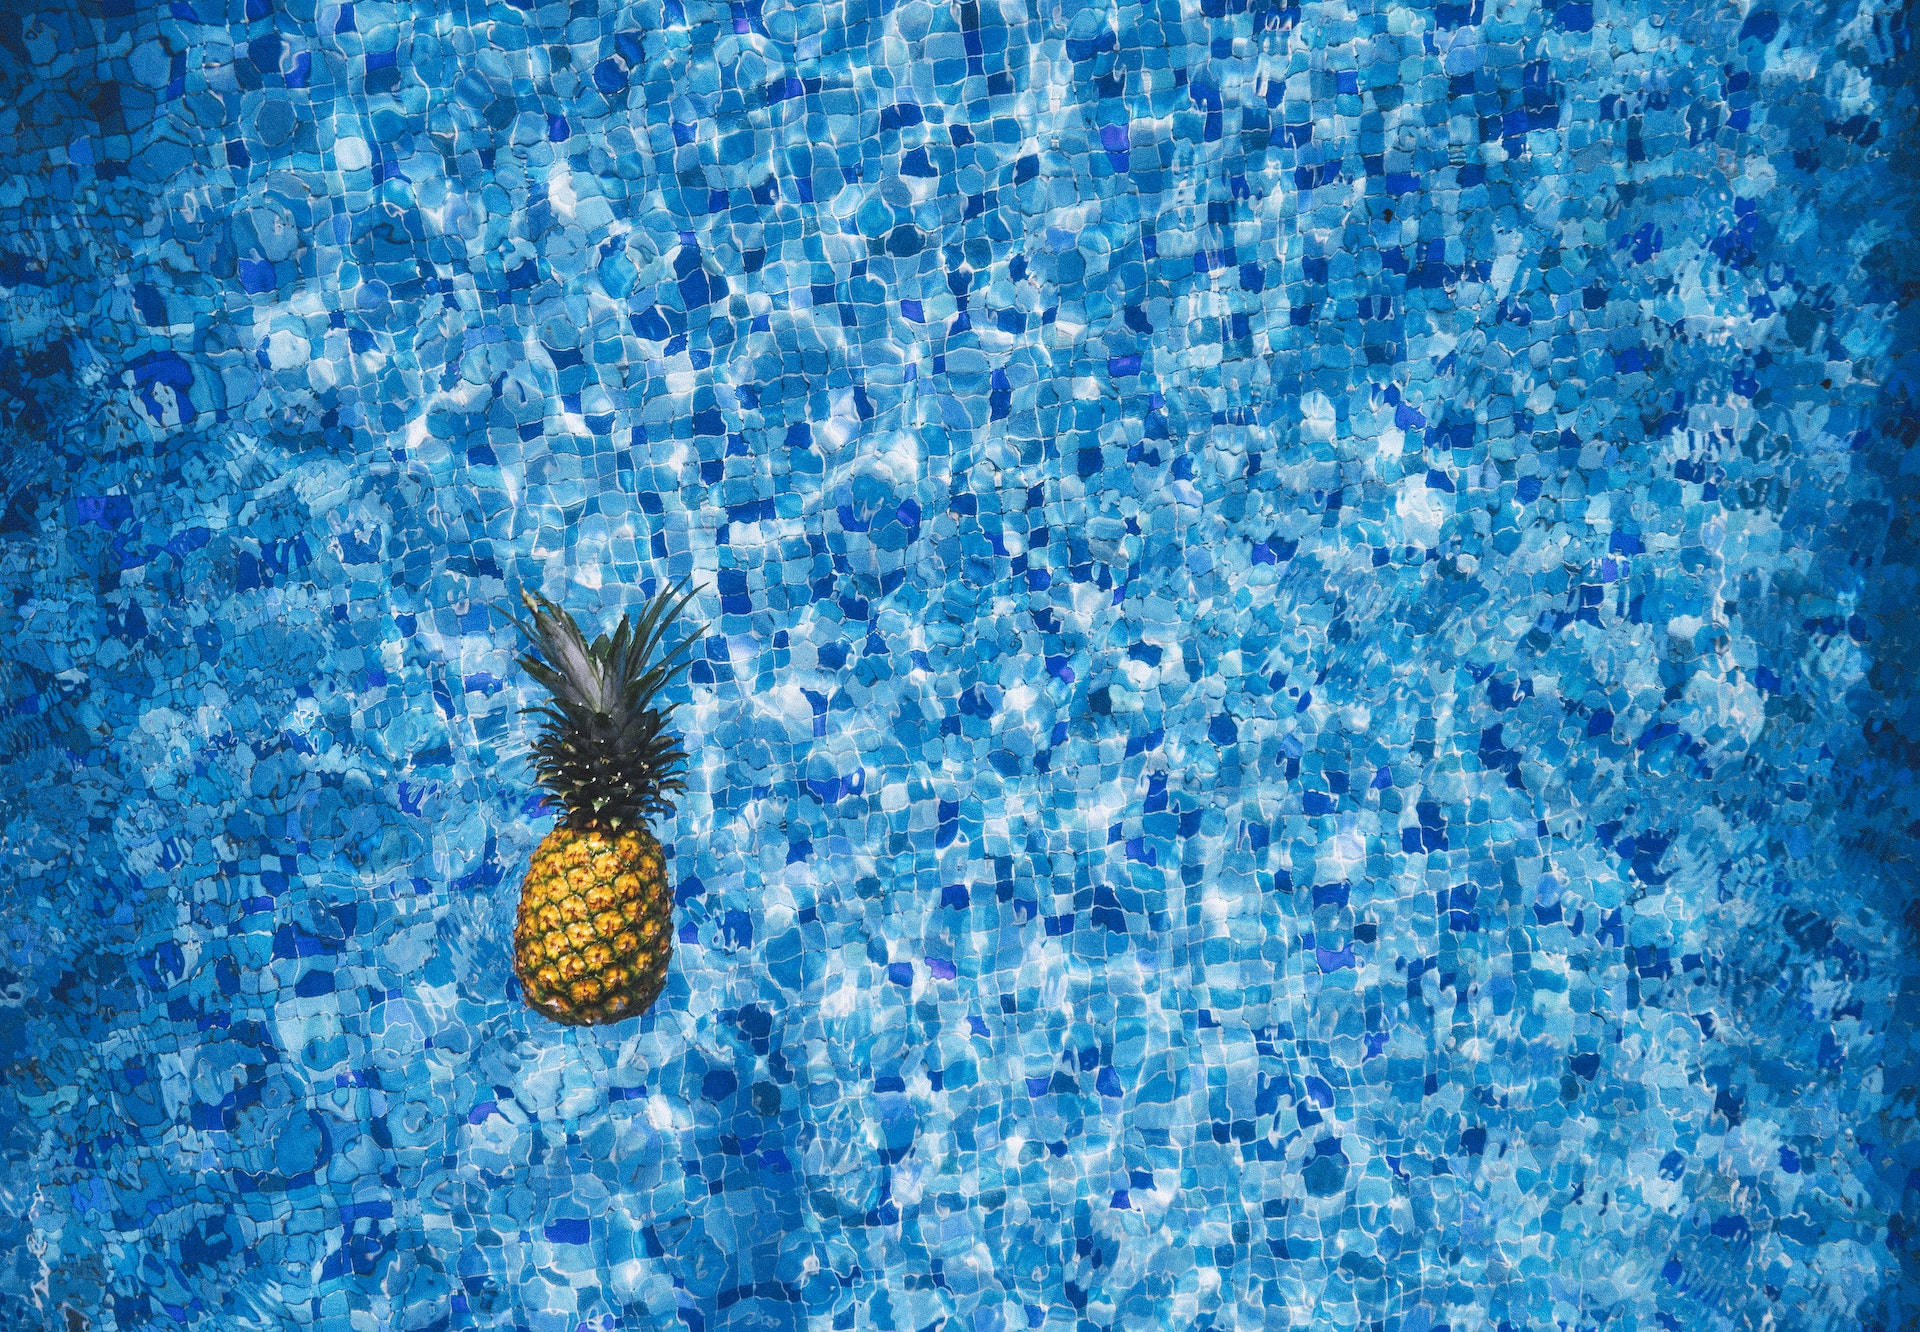 Pineapple On Water Blue Color Hd Wallpaper